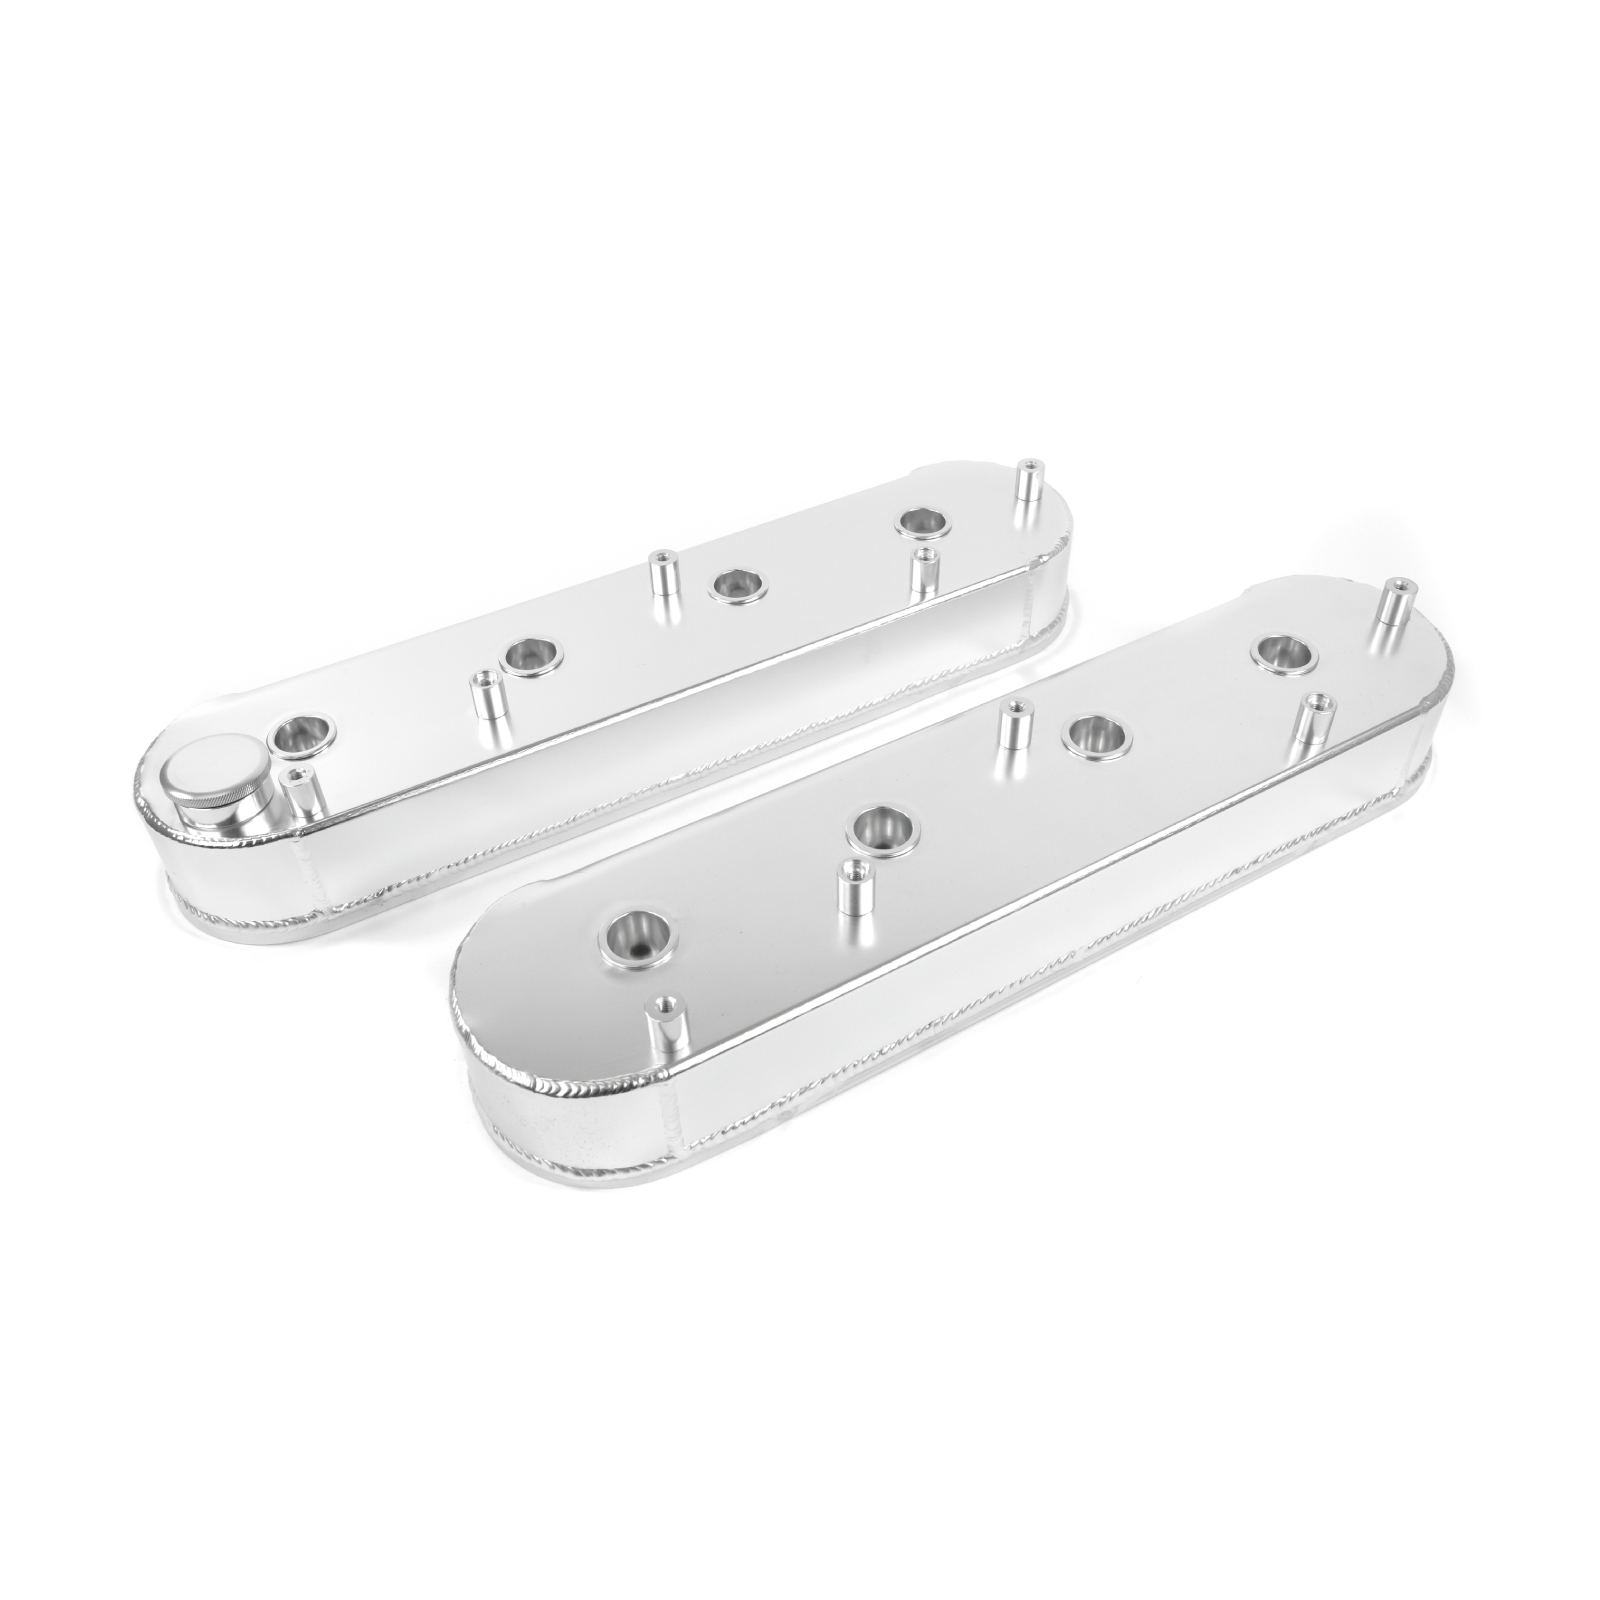 GM LSX V8 (4.8L-7.0L) Clear Anodized Fabricated Aluminum Valve Covers with Coil Bracket Mounts